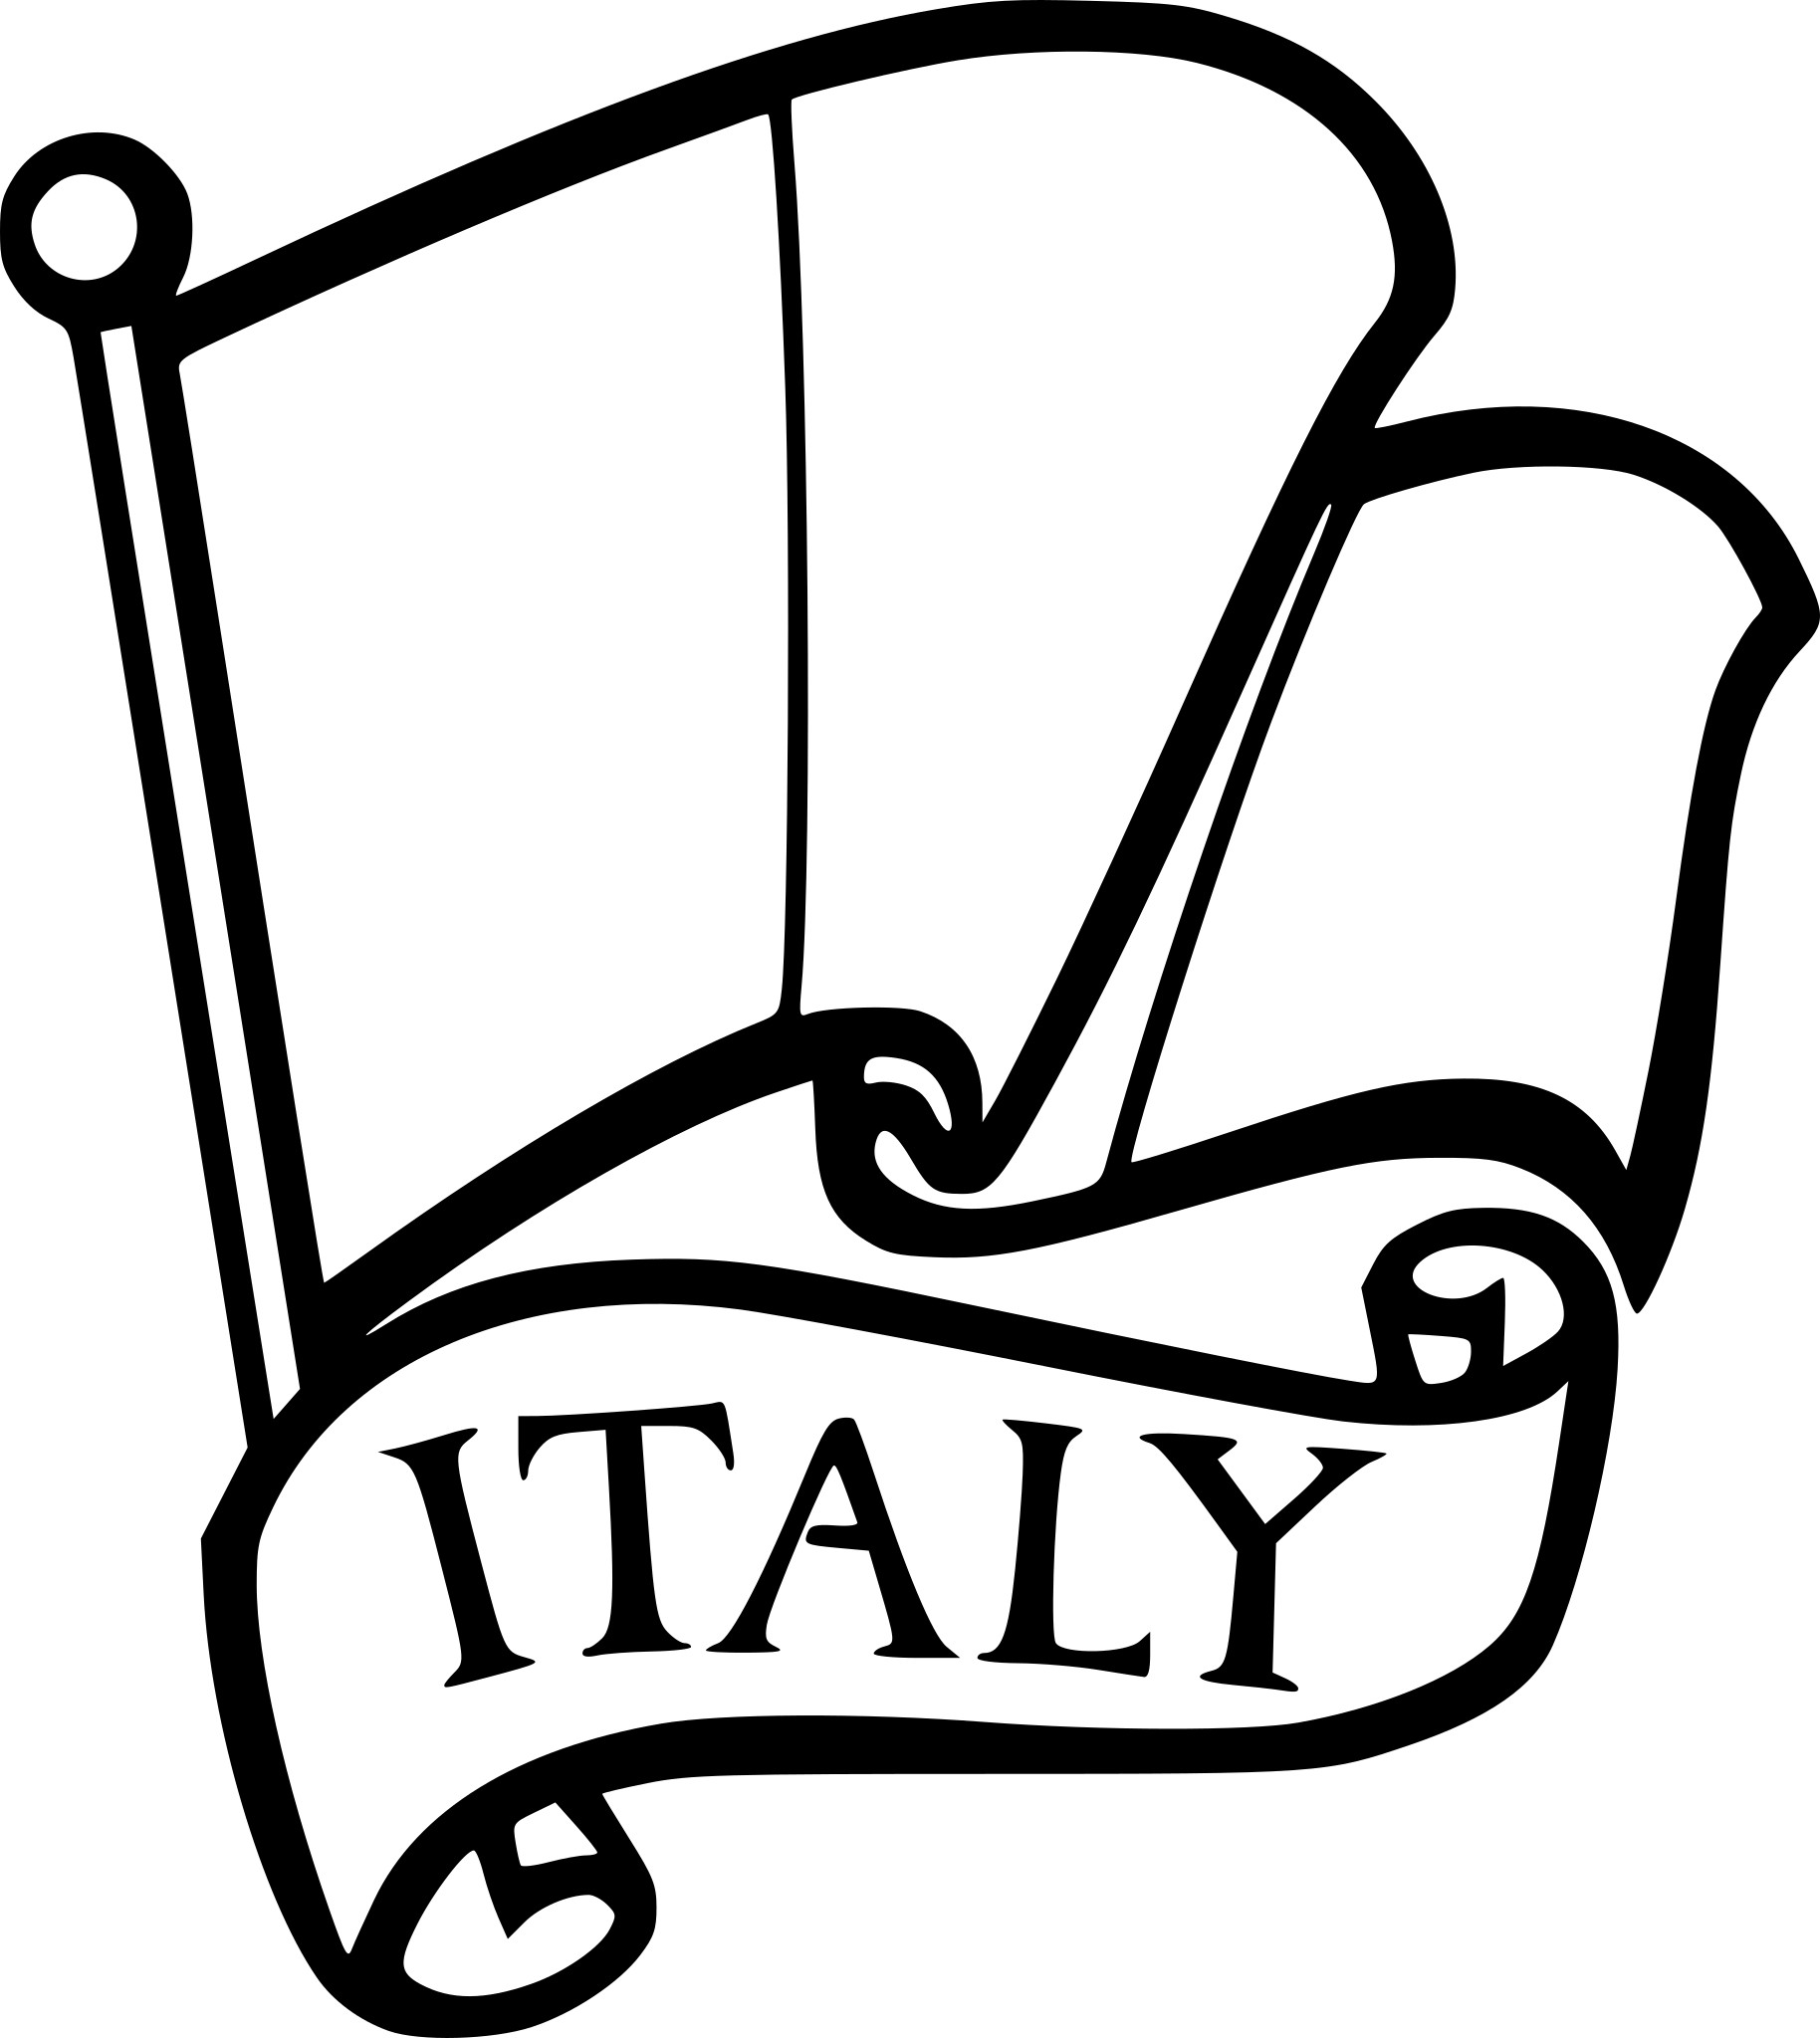 Italy Flag coloring page - free printable coloring pages on coloori.com